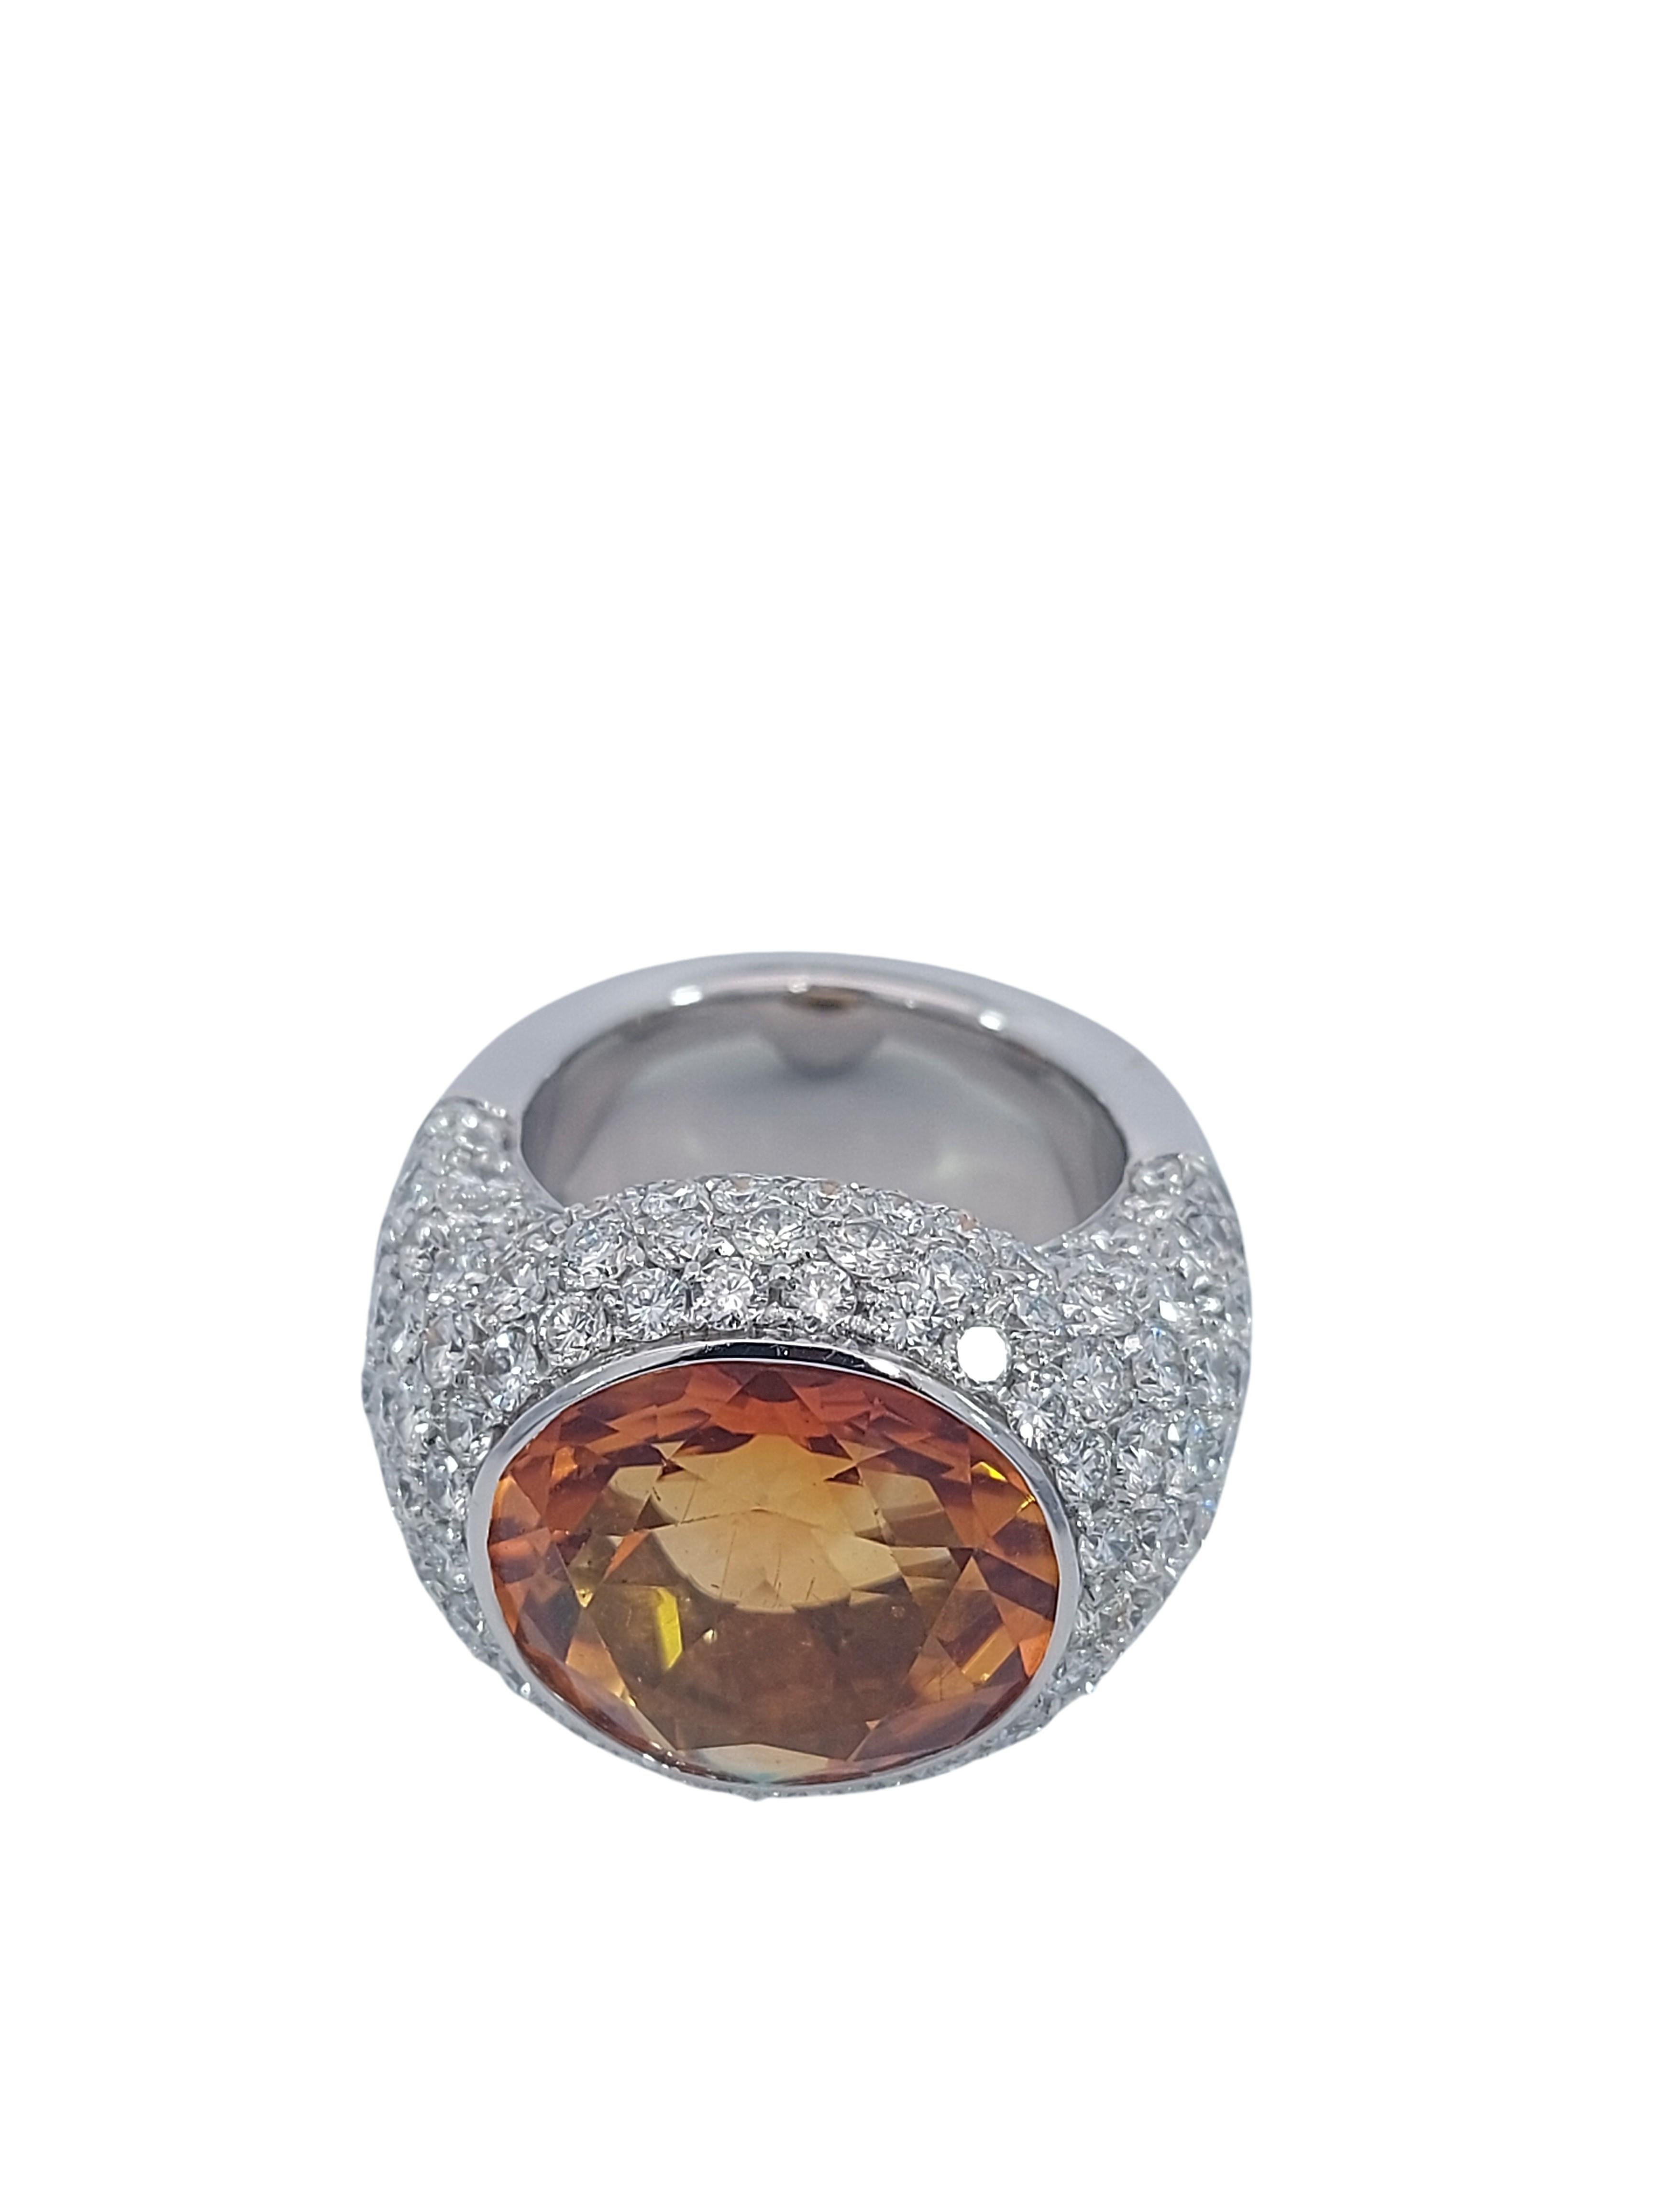 Stunning 18kt Solid White Gold Ring with 6.4ct Diamonds and Big Citrine Stone For Sale 2